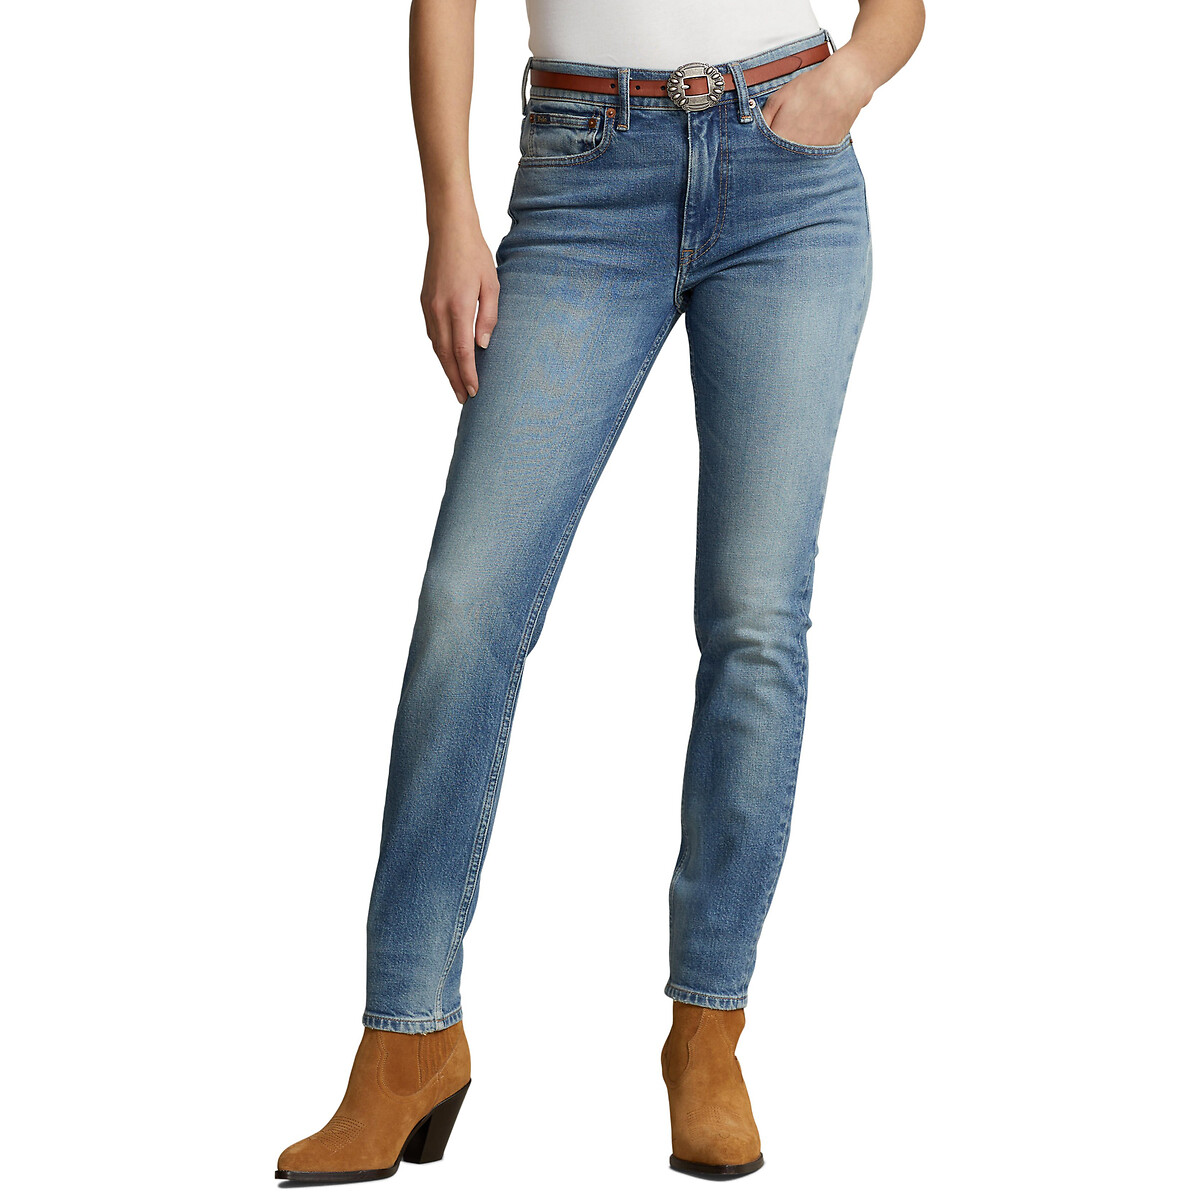 Skinny-Jeans in Washed-out-Optik von Polo Ralph Lauren